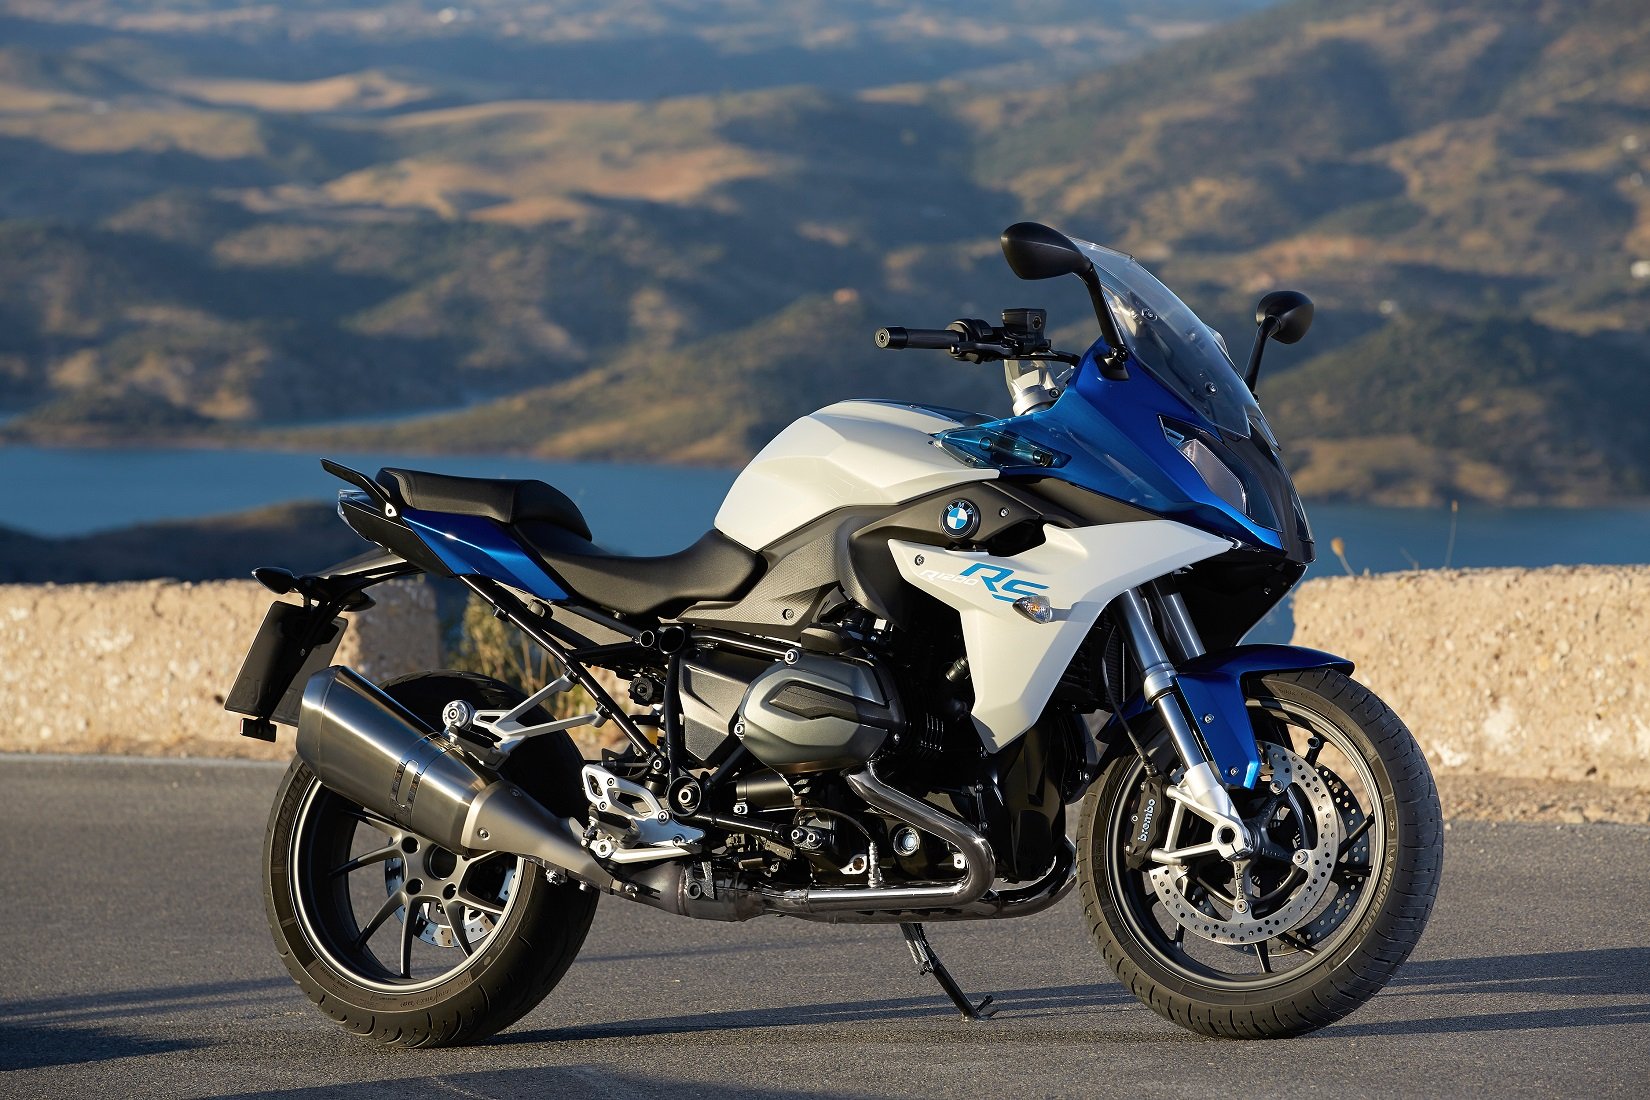 bmw, R 1200 rs, Motorcycles, 2015 Wallpaper